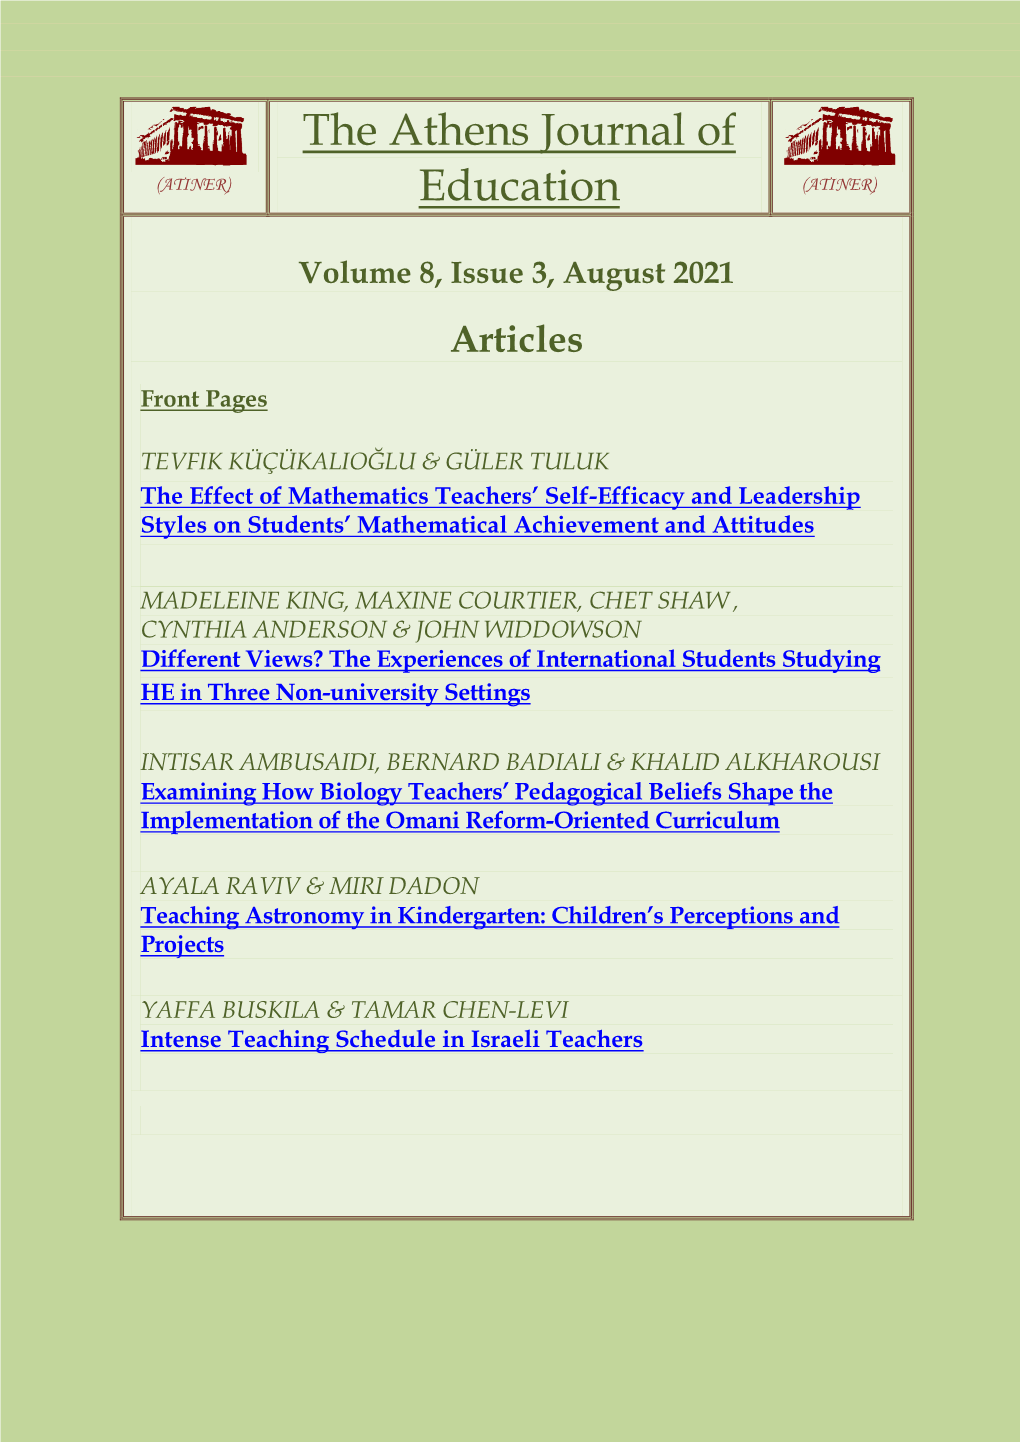 The Athens Journal of Education ISSN NUMBER: 2241-7958 - DOI: 10.30958/Aje ISSN (Print): 2407-9898 Volume 8, Issue 3, August 2021 Download the Entire Issue (PDF)